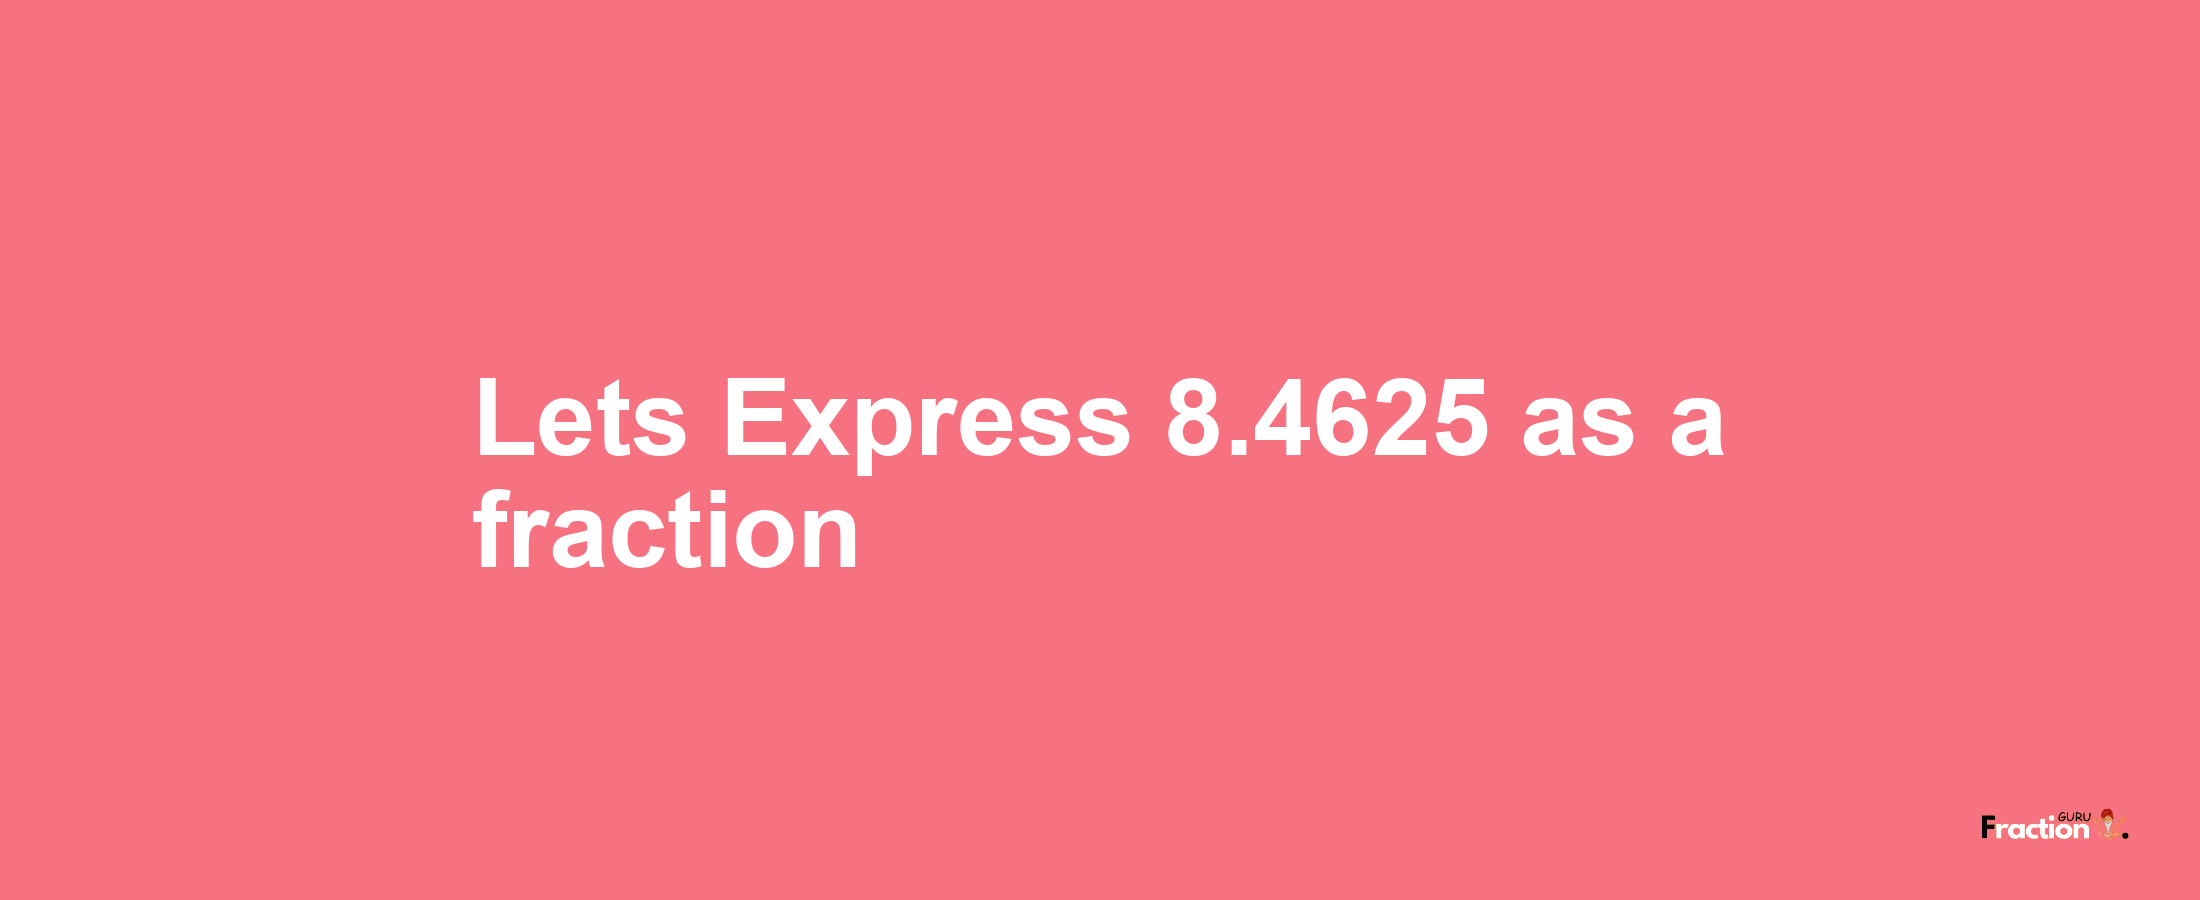 Lets Express 8.4625 as afraction